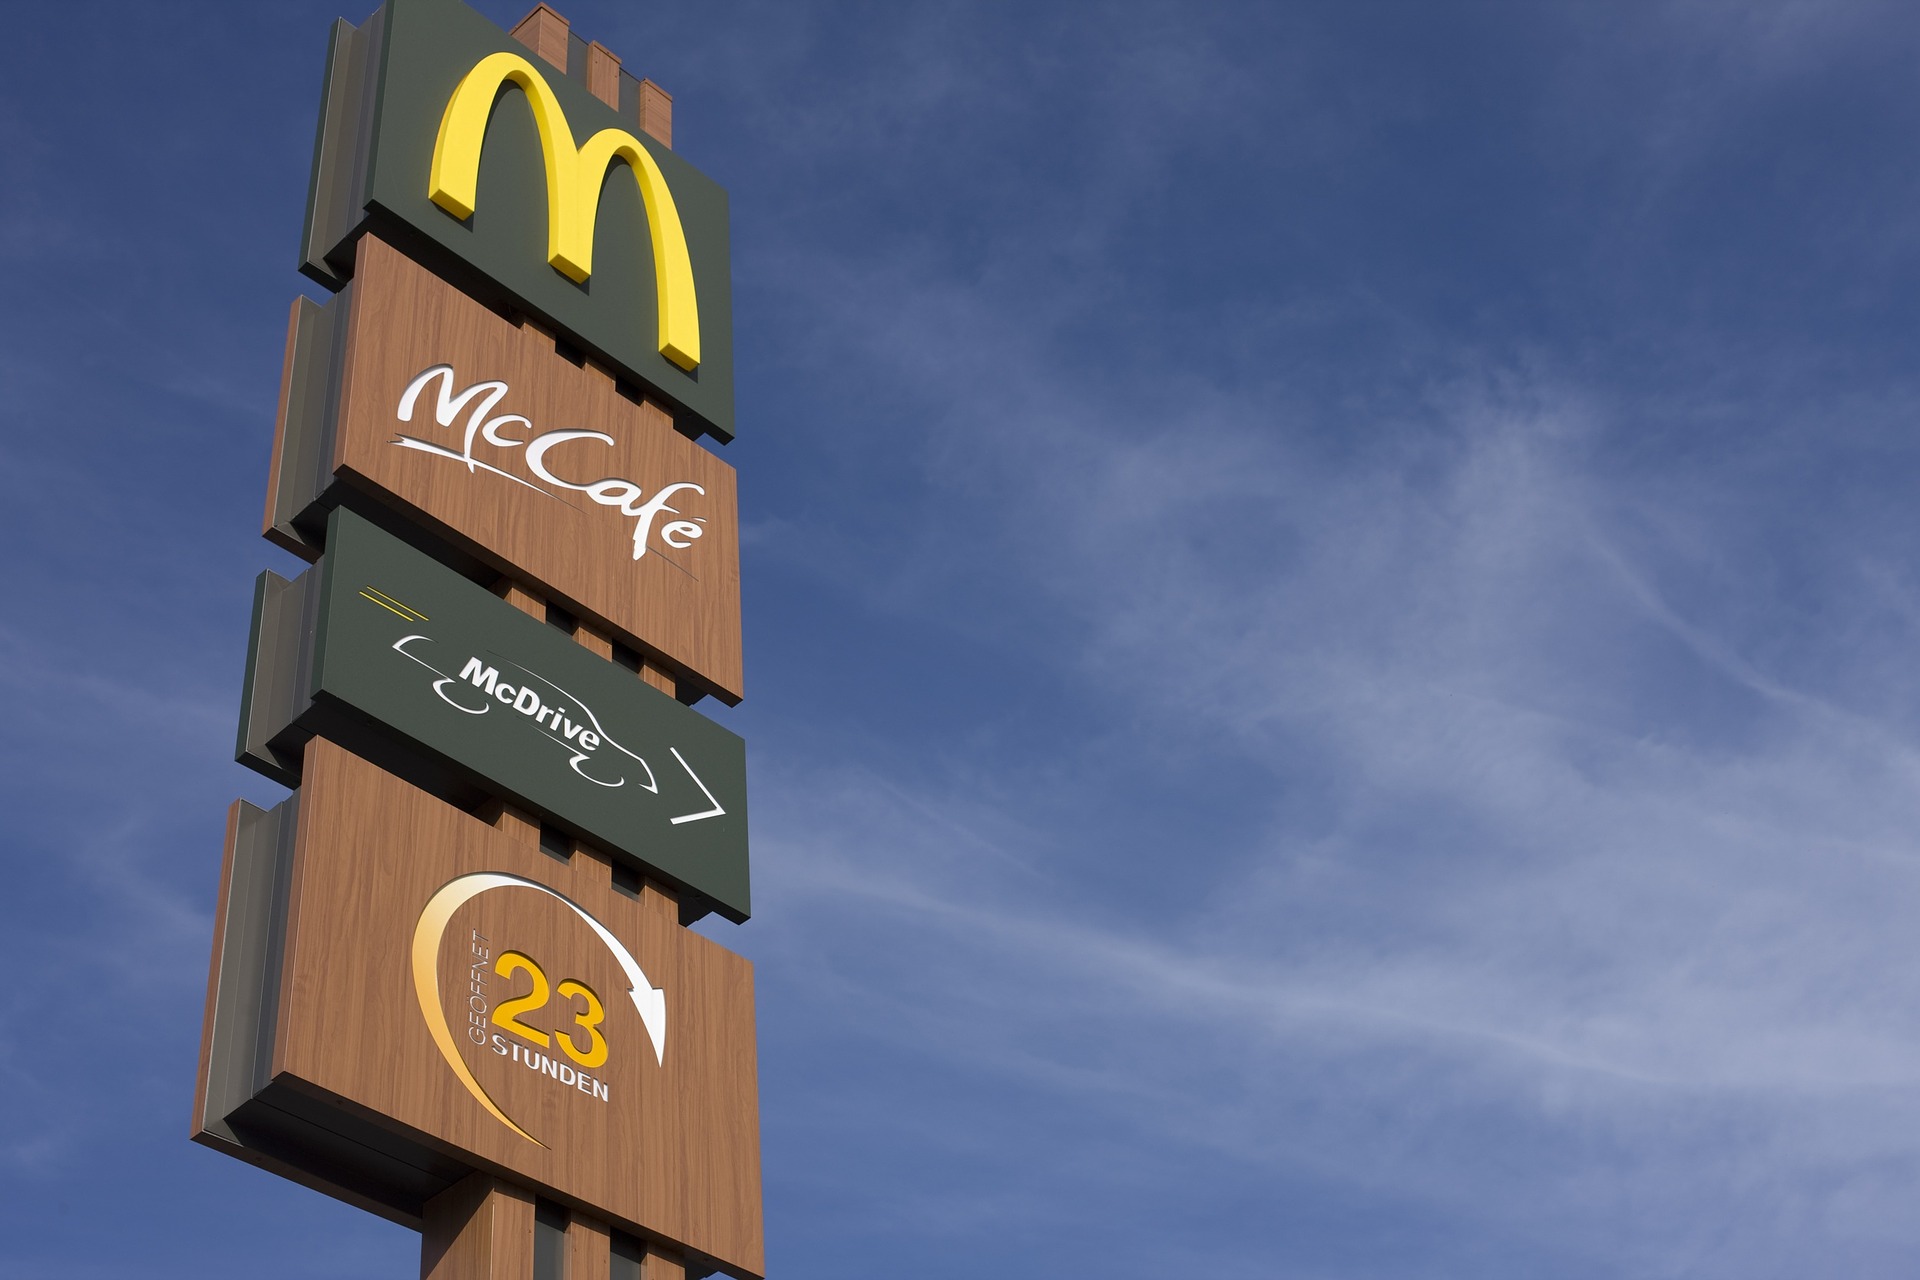 McDonald’s workers stage first UK strike